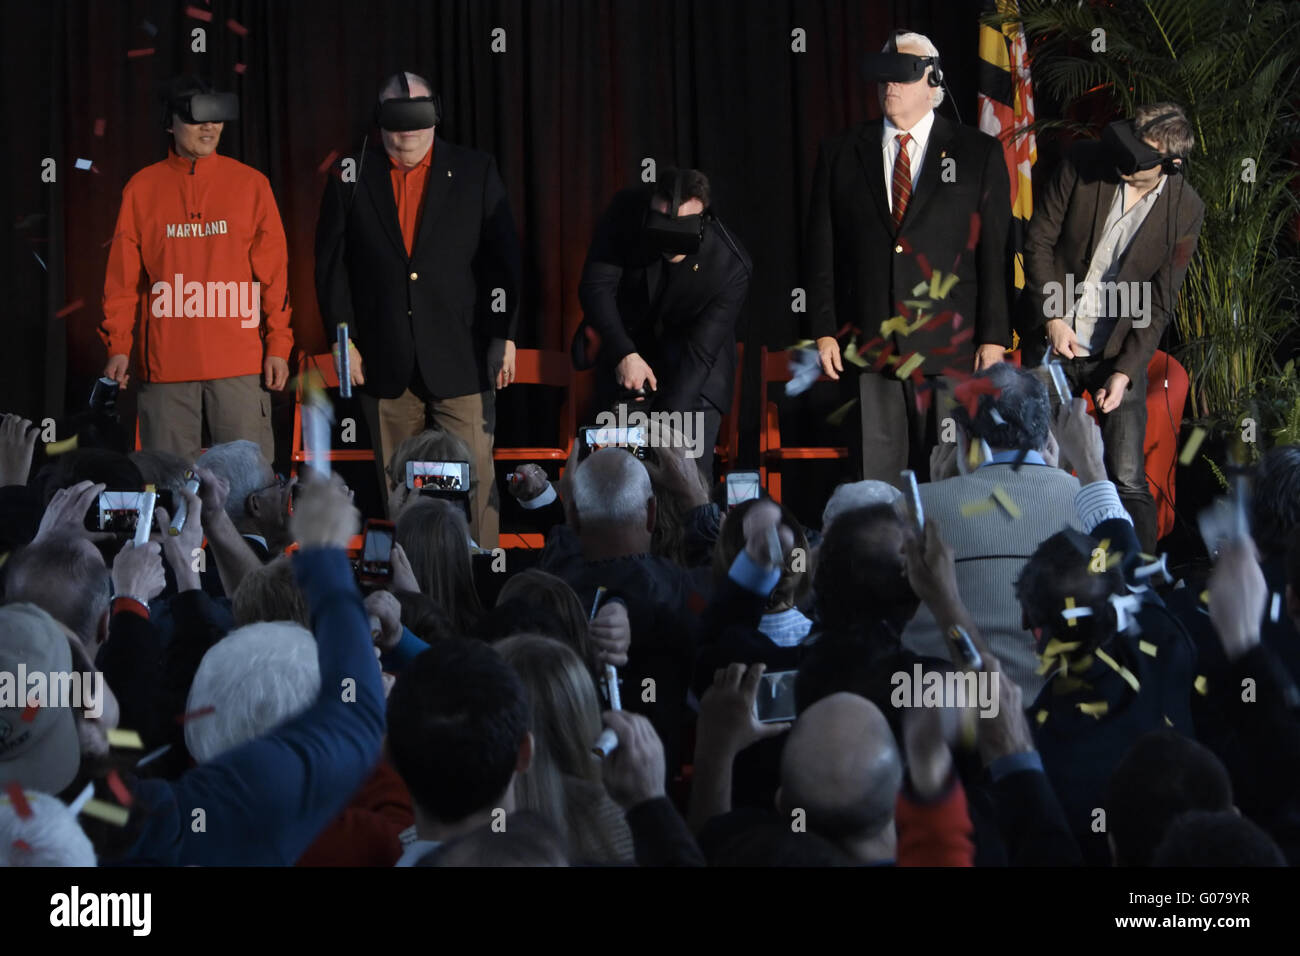 College Park, MARYLAND, USA. 30th Apr, 2016. Brendan Iribe, Co-Founder and CEO, Oculus VR, Inc., seen pretending to use a virtual shovel while wearing an Oculus headset for the official groundbreaking for the Brendan Iribe Center. Also seen wearing Oculus headsets are University of Maryland President Wallace Loh, Maryland Governor Larry Hogan, Maryland Senate President Thomas ''Mike'' Miller, Jr., and Co-Founder and Chief Software Architect of Oculus VR Michael Antonov. The ceremony was held in Lot GG1 the future site of the building at the University of Maryland. (Credit Image: © Evan Gol Stock Photo